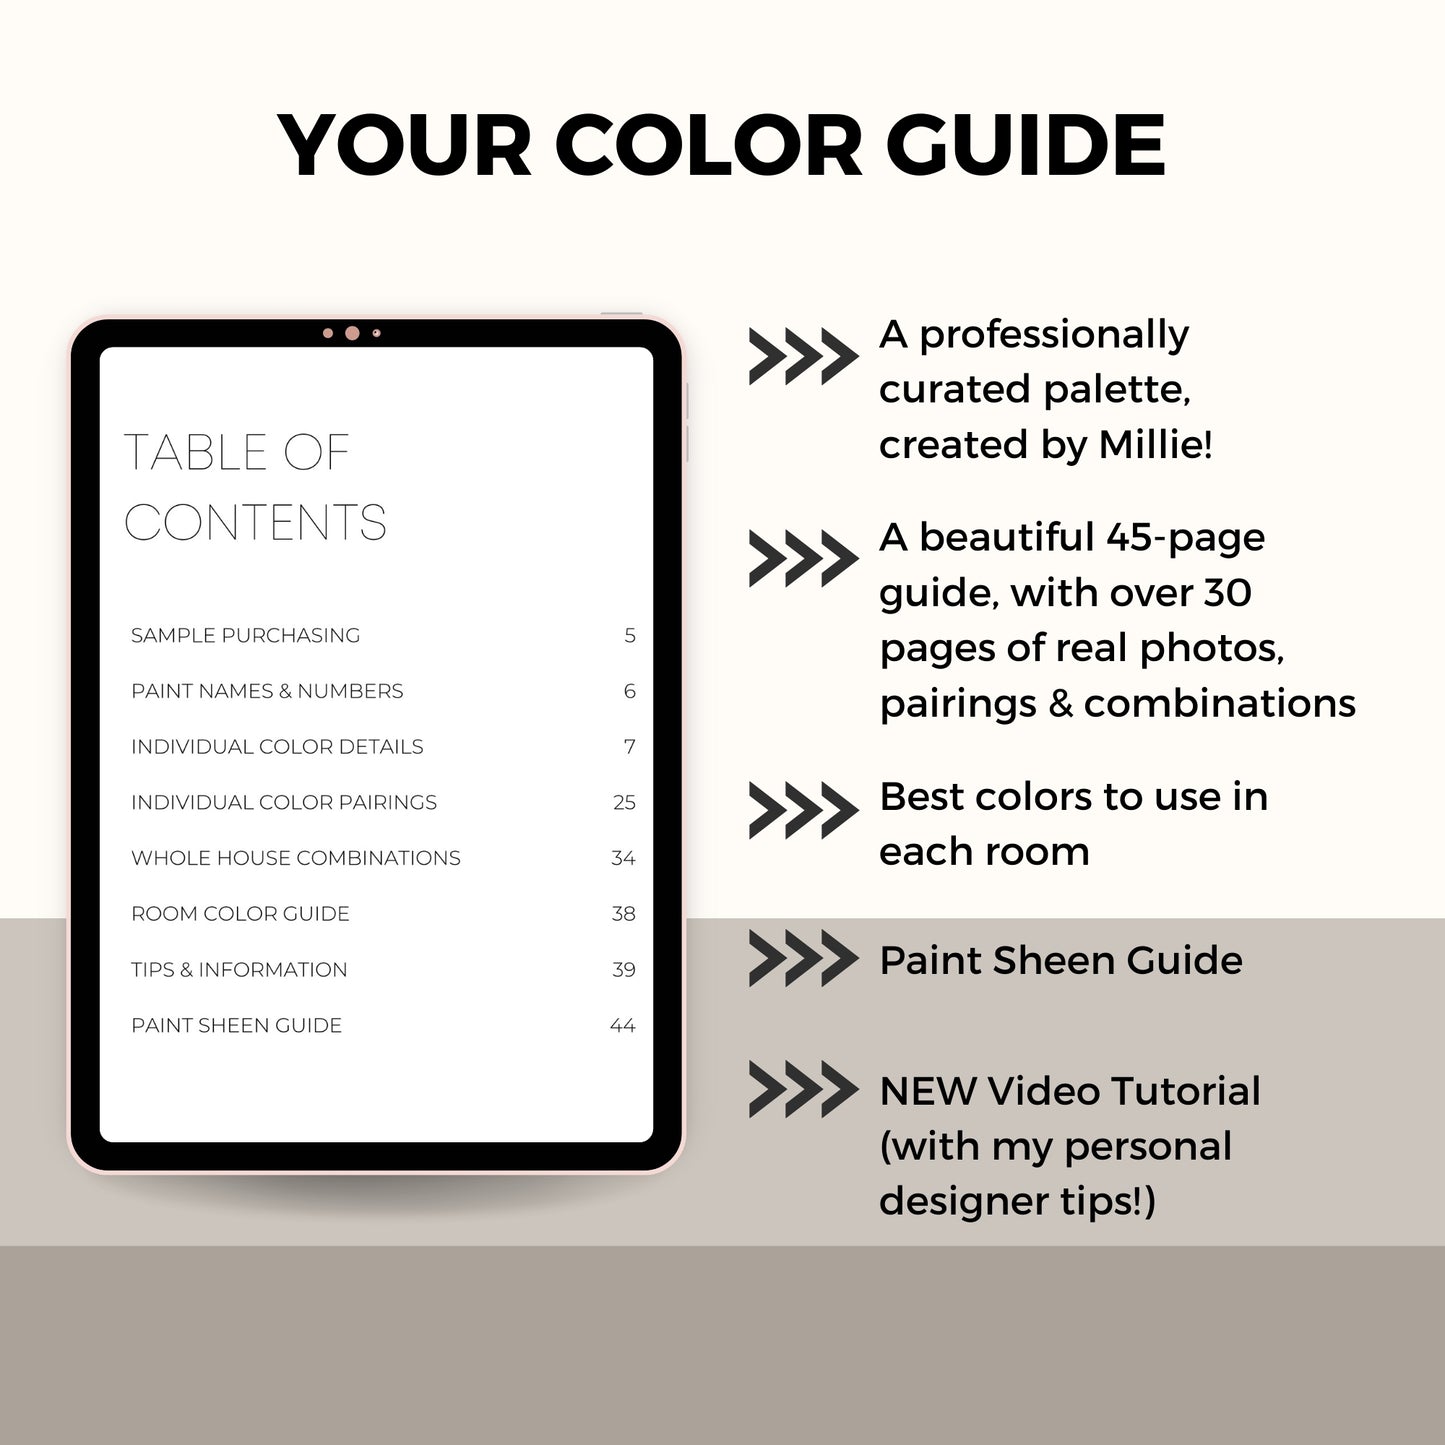 Greige Farmhouse Sherwin Williams Paint Palette - Modern Neutral Interior Paint Colors for Home - Coordinating Interior Design Color Palette, Sherwin Williams, Repose Gray